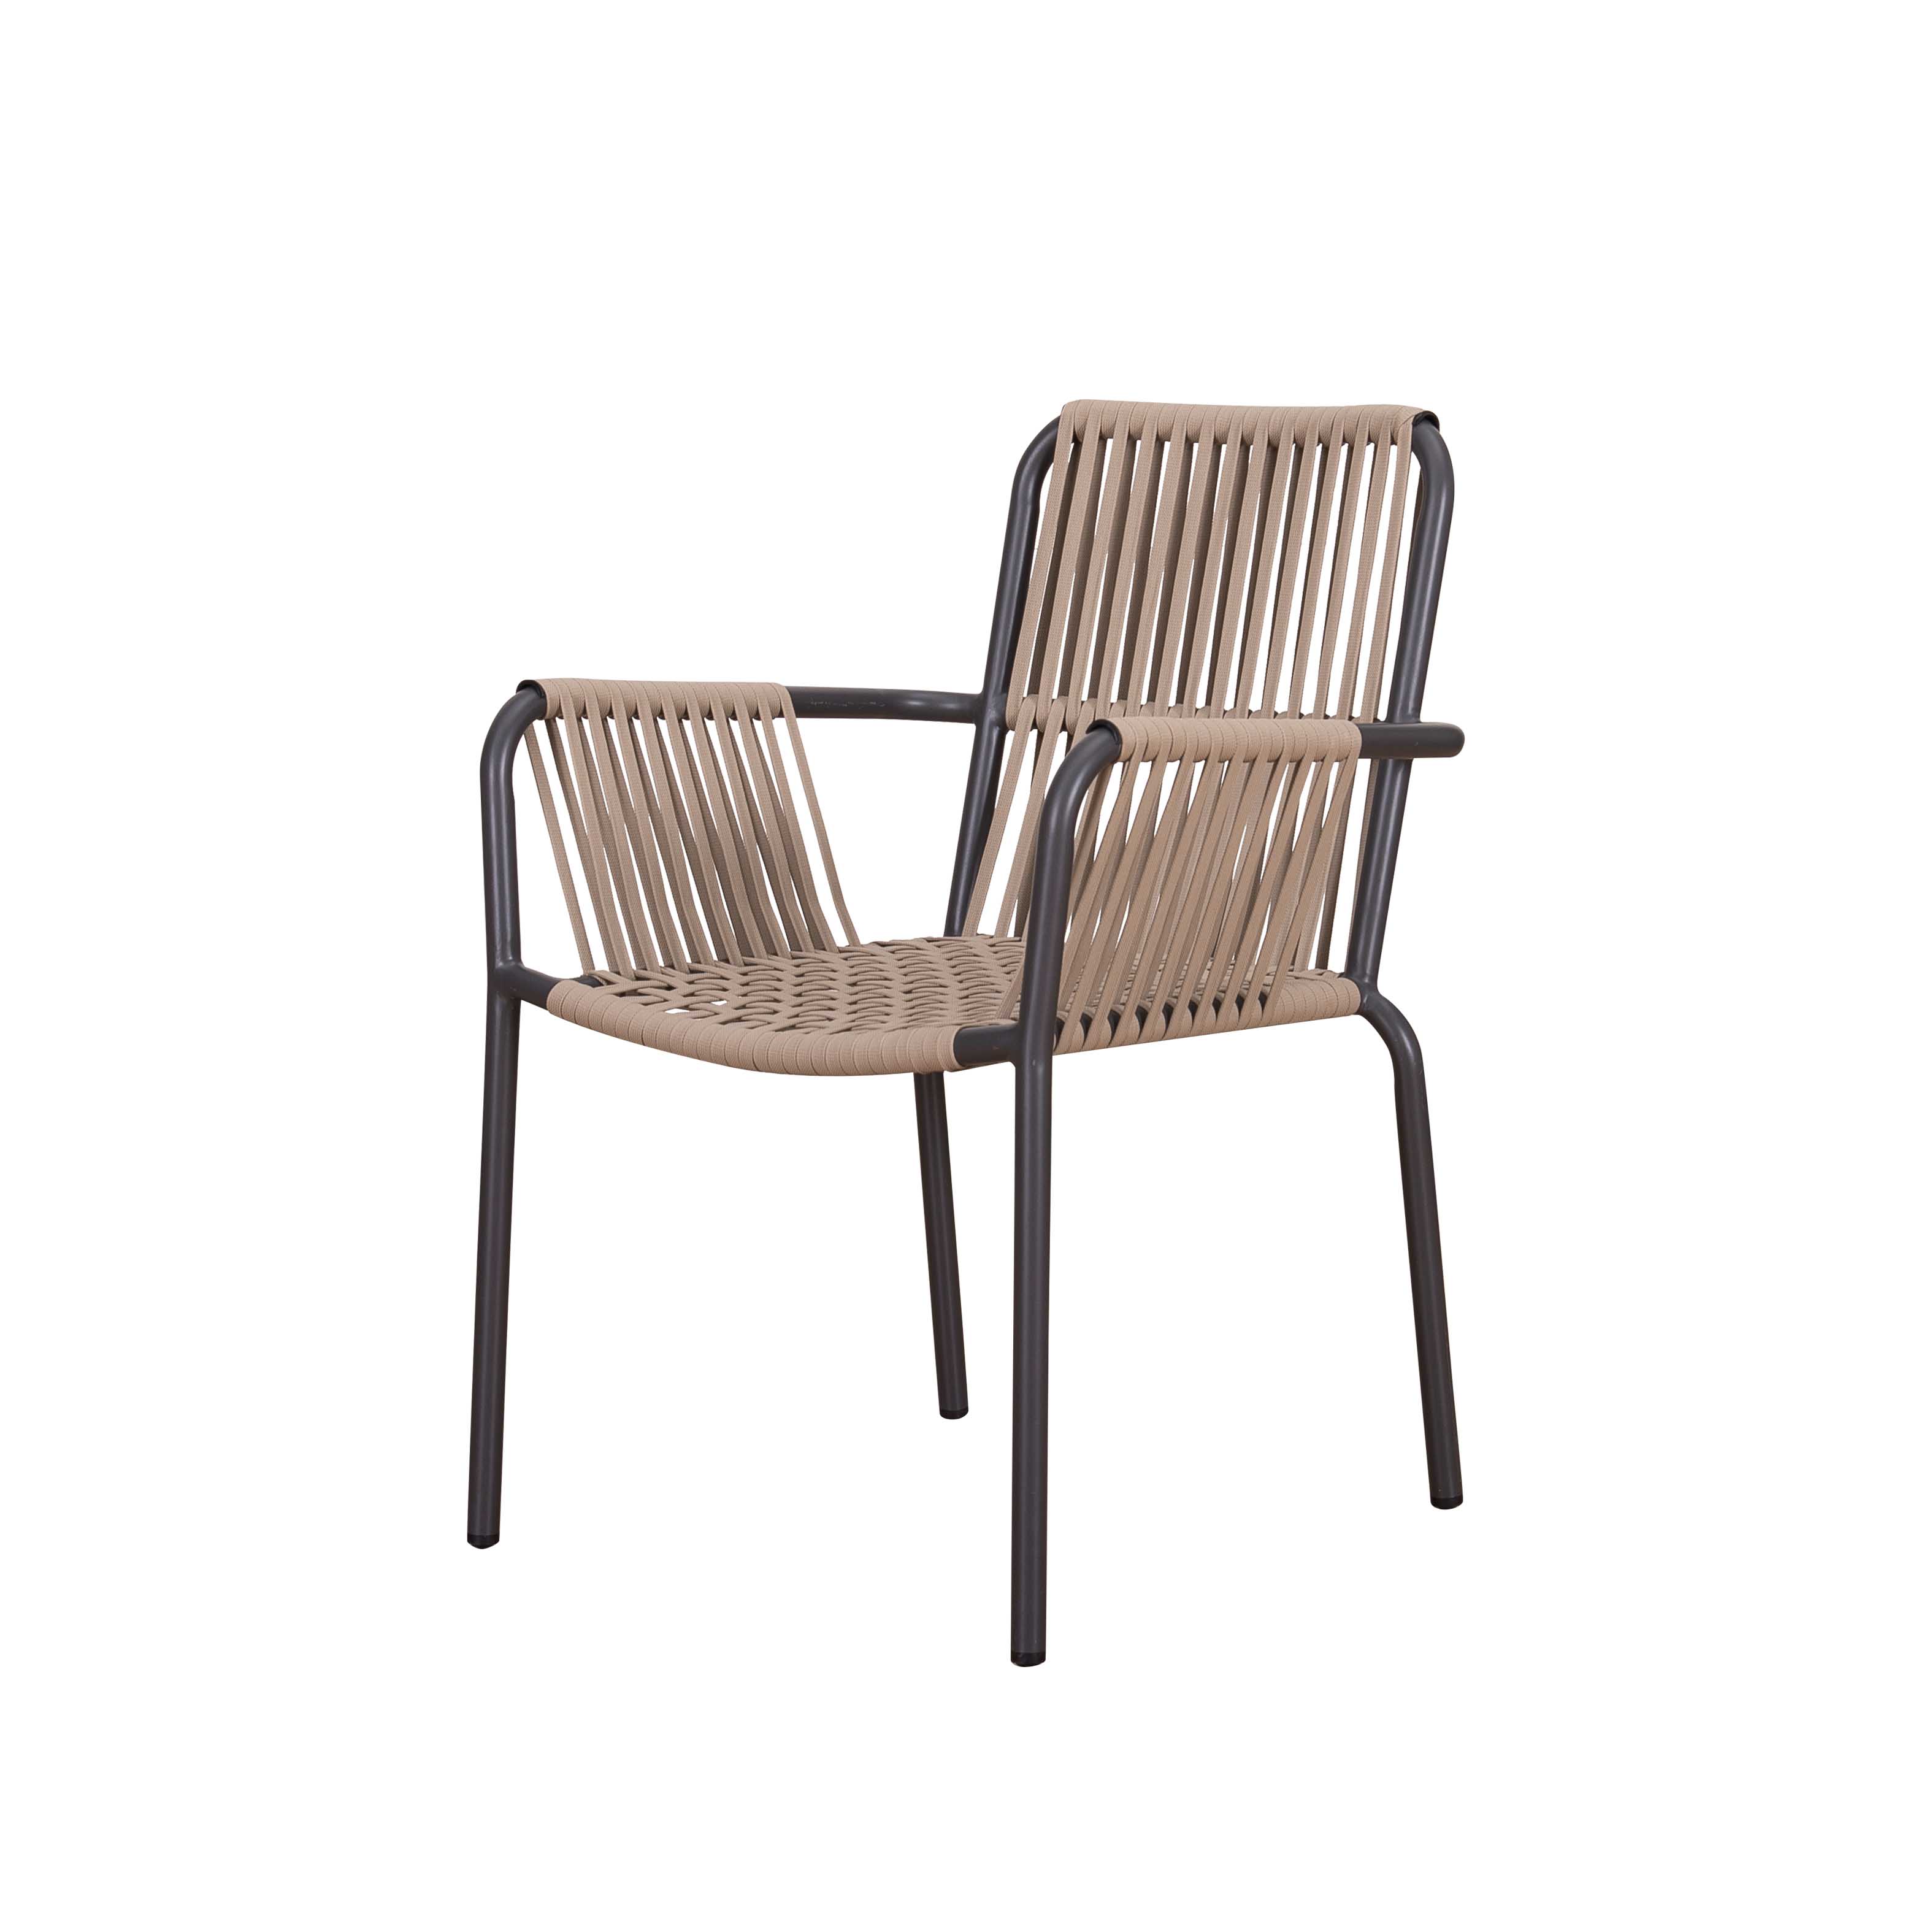 Lincoln rope chair S5